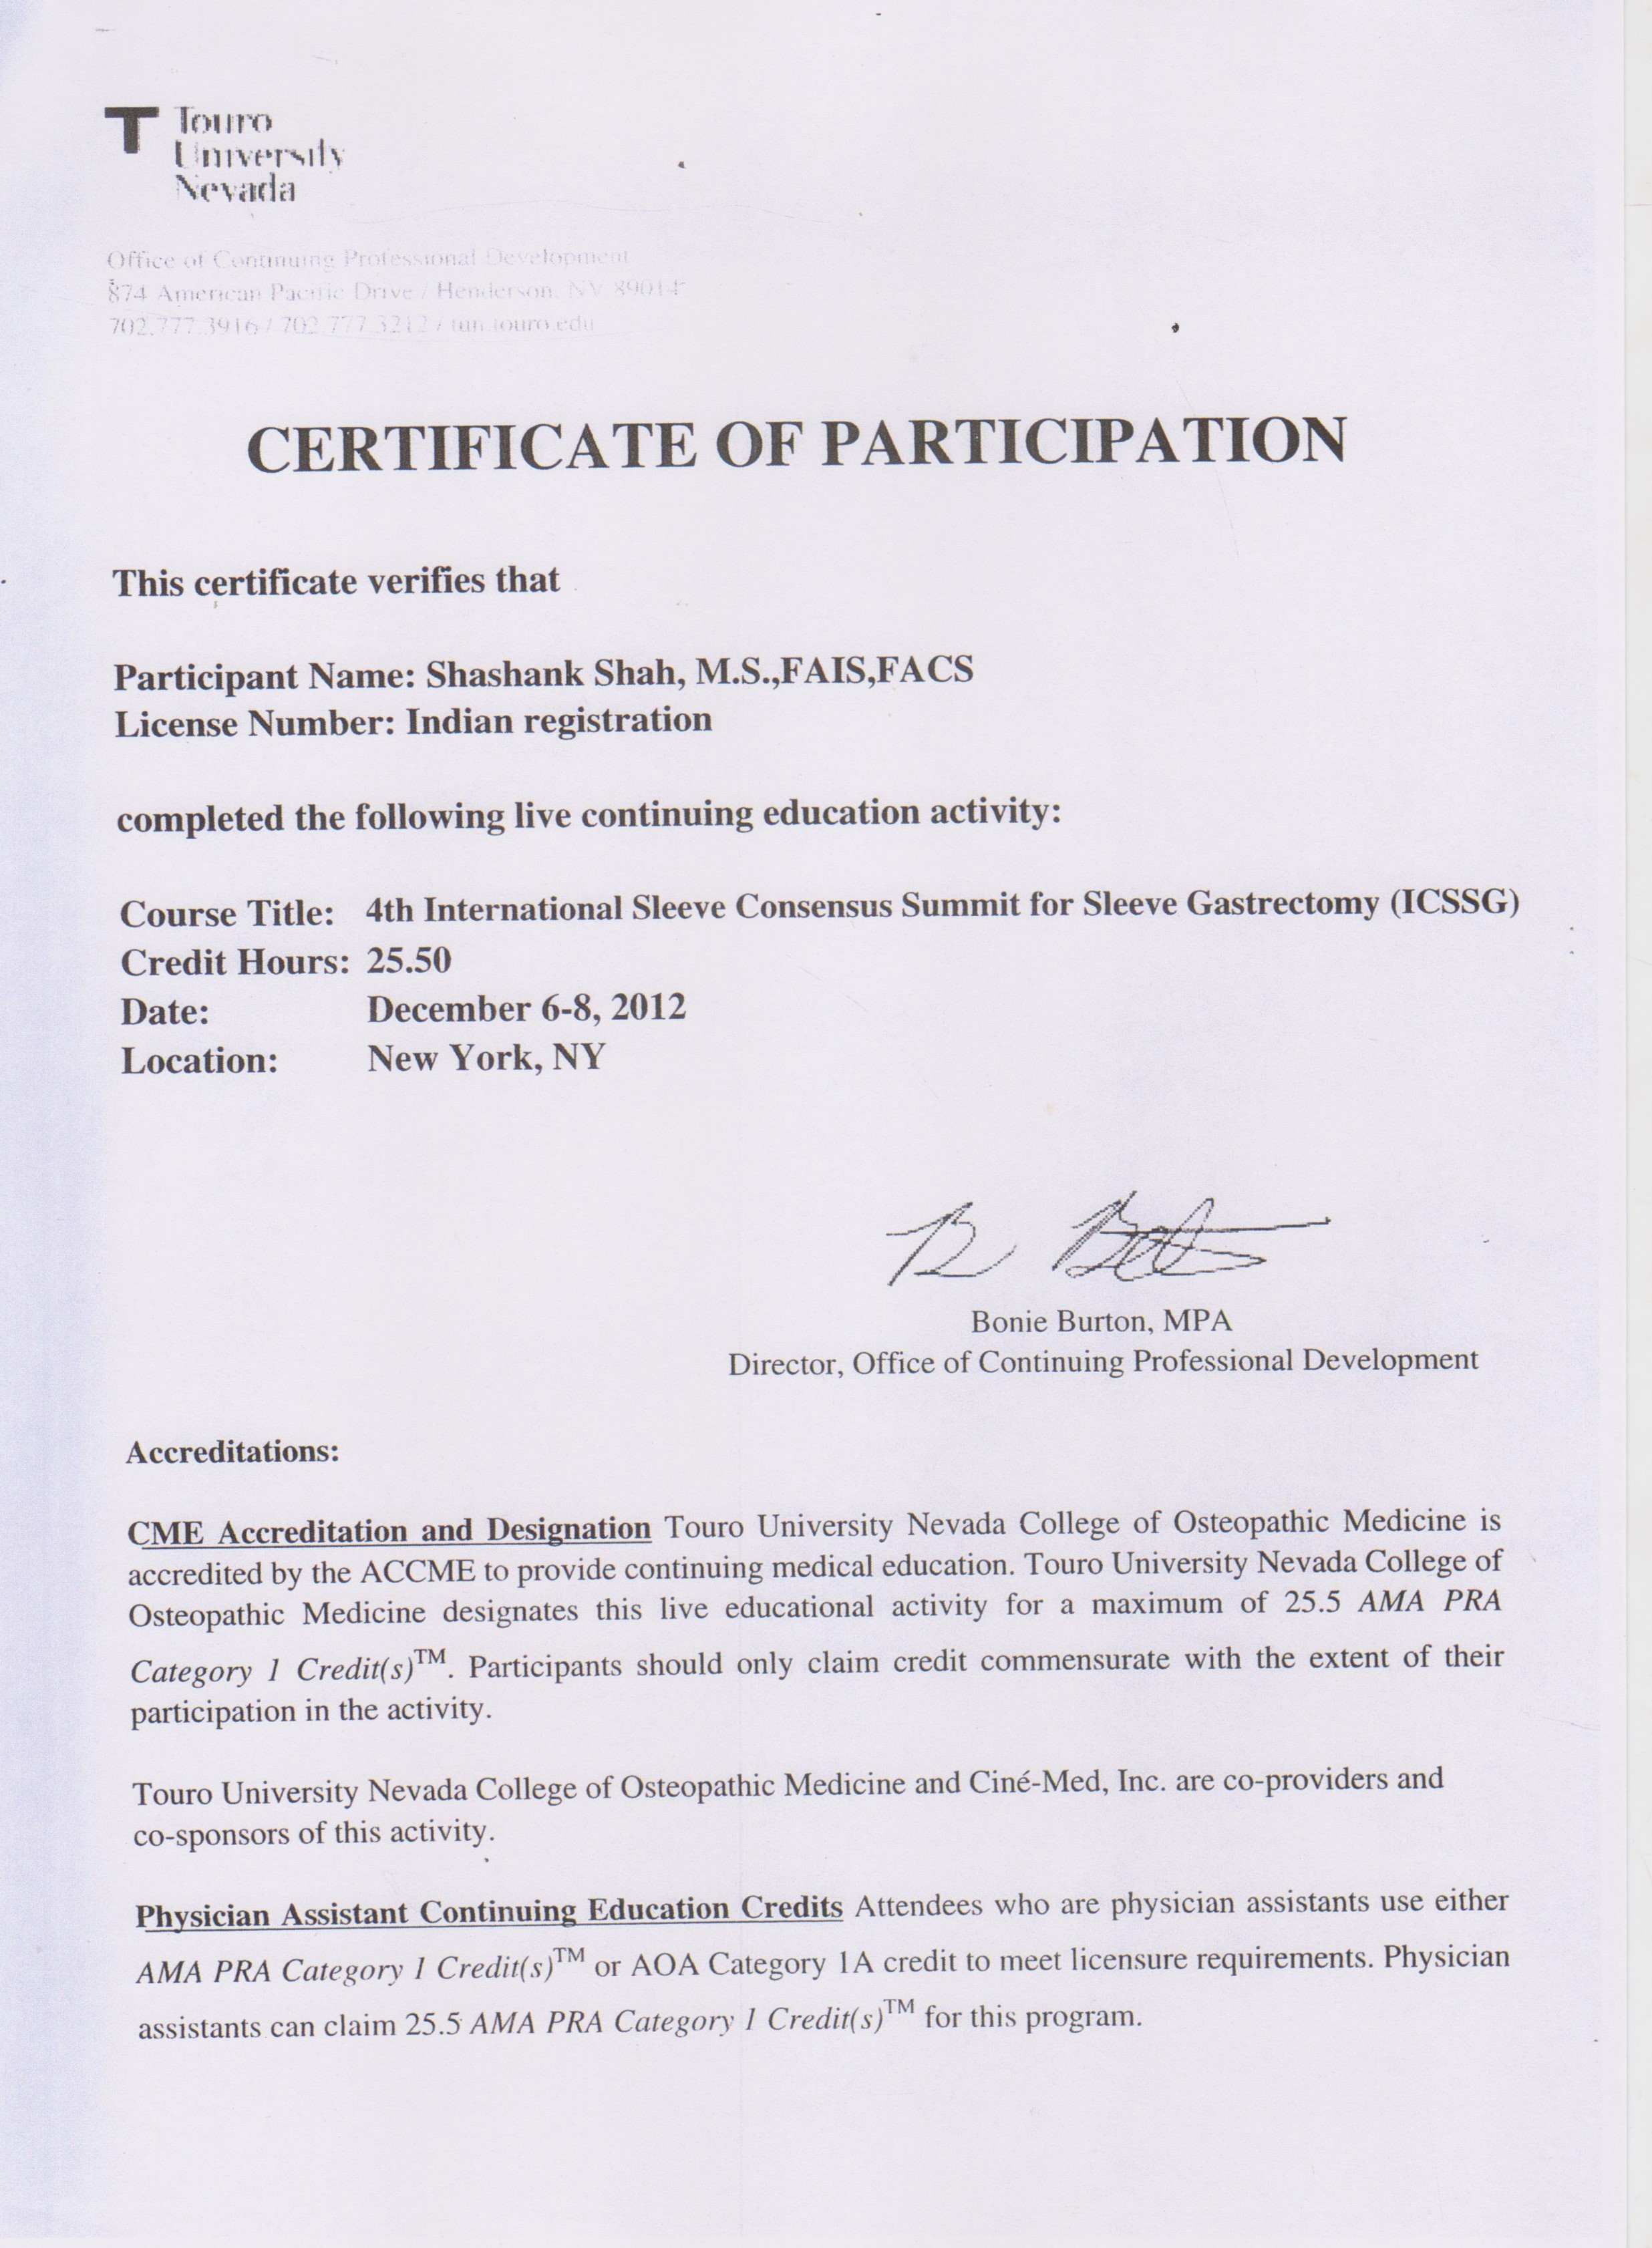 Certificate of Participation as an International member at the International Sleeve Consensus Summit for Sleeve Gastrectomy (ISCSSG) held in New York in 2012. 